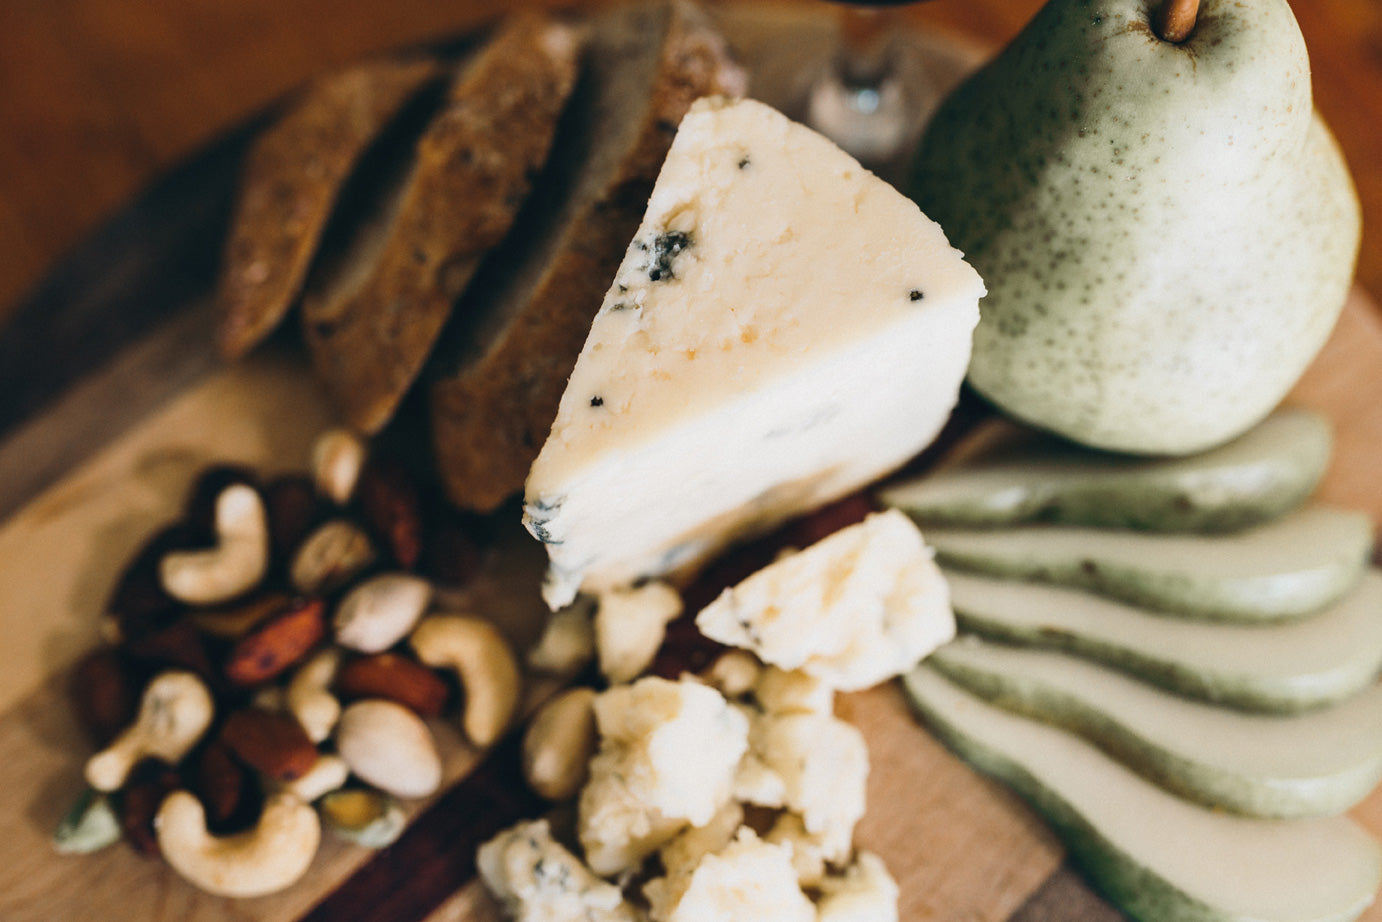 Bleu Claire cheese is shown on a wooden board with salted nuts, seedy bread, and thinly sliced pear. The cheese has a gentle blue veining.